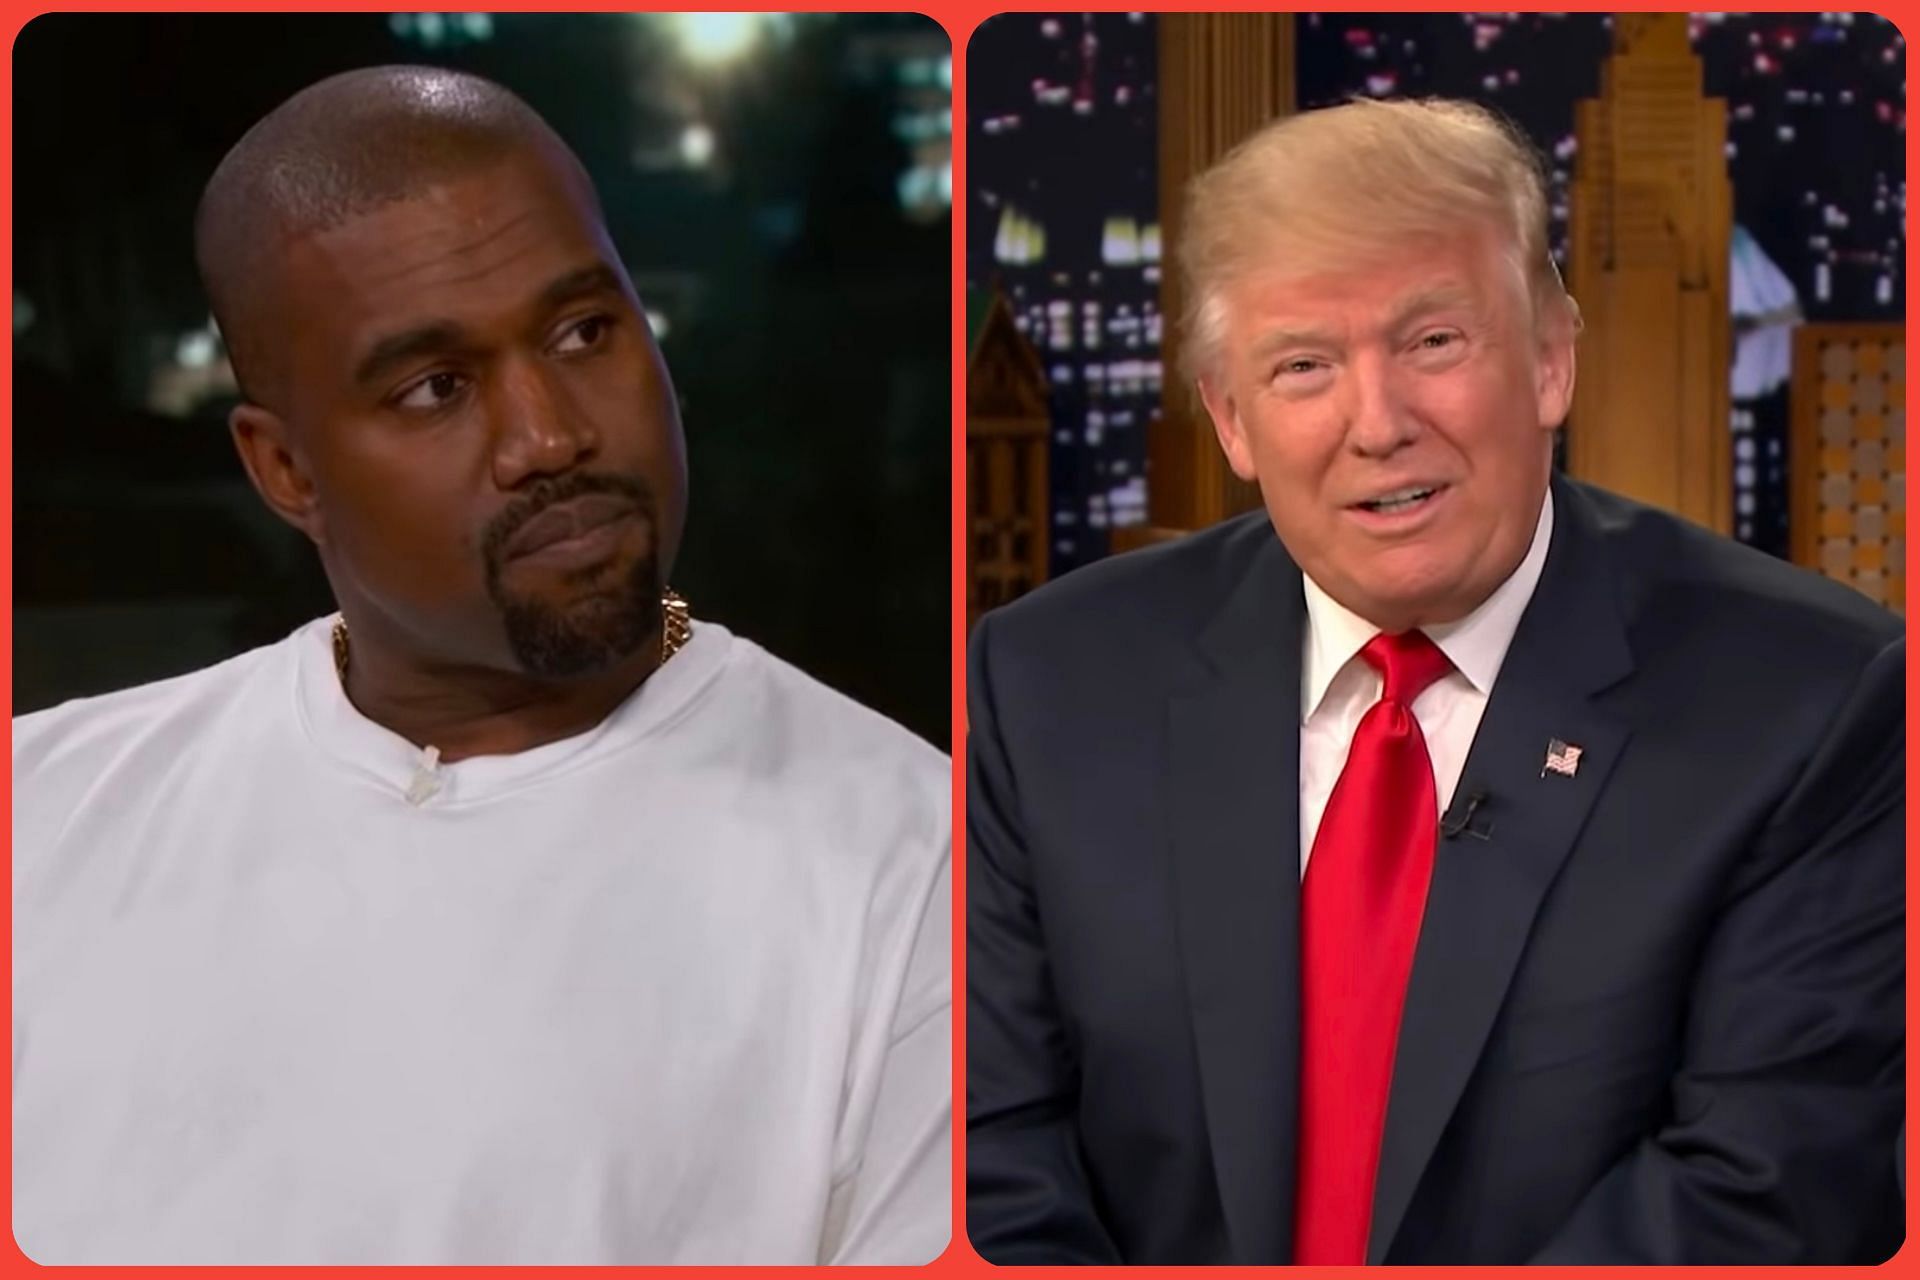 Trump calls Kanye West a &lsquo;seriously troubled man&rsquo; after Mar-a-Lago dinner (Image via YouTube/The Tonight Show Starring Jimmy Fallon and YouTube/Jimmy Kimmel Live)